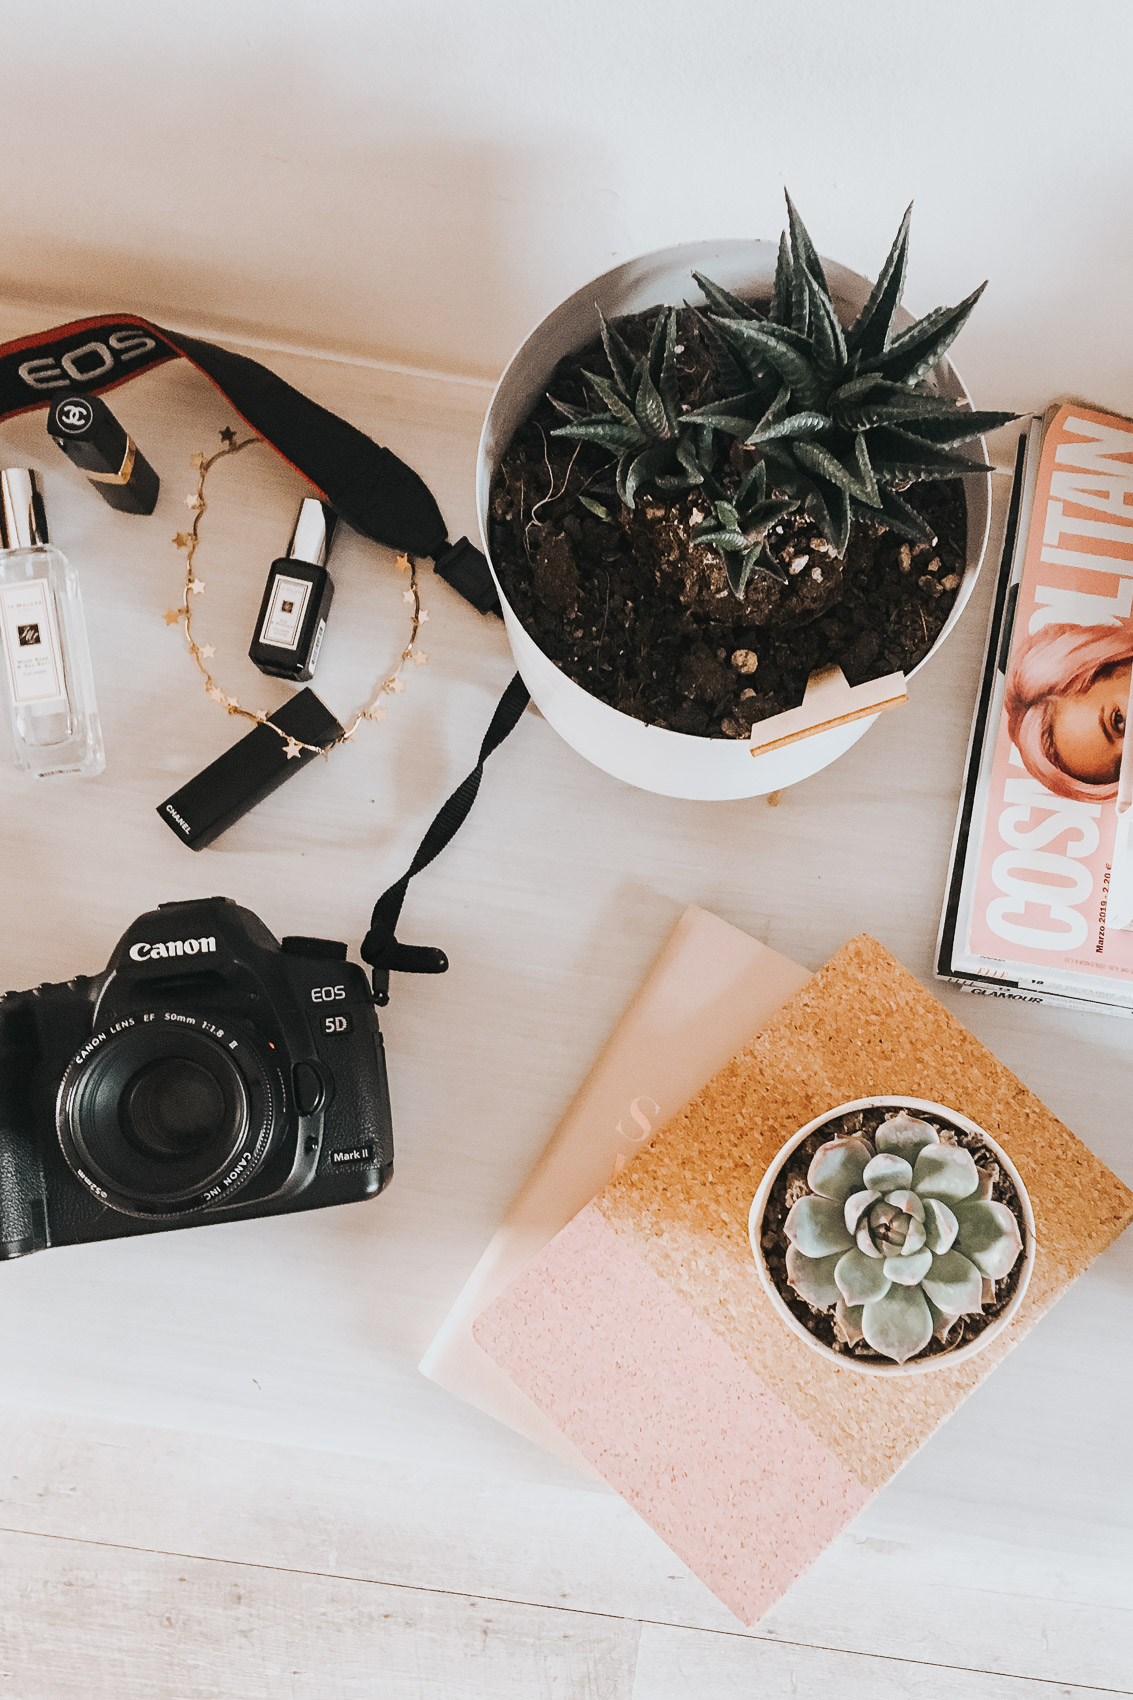 Learn Blog Photography or Photography for bloggers